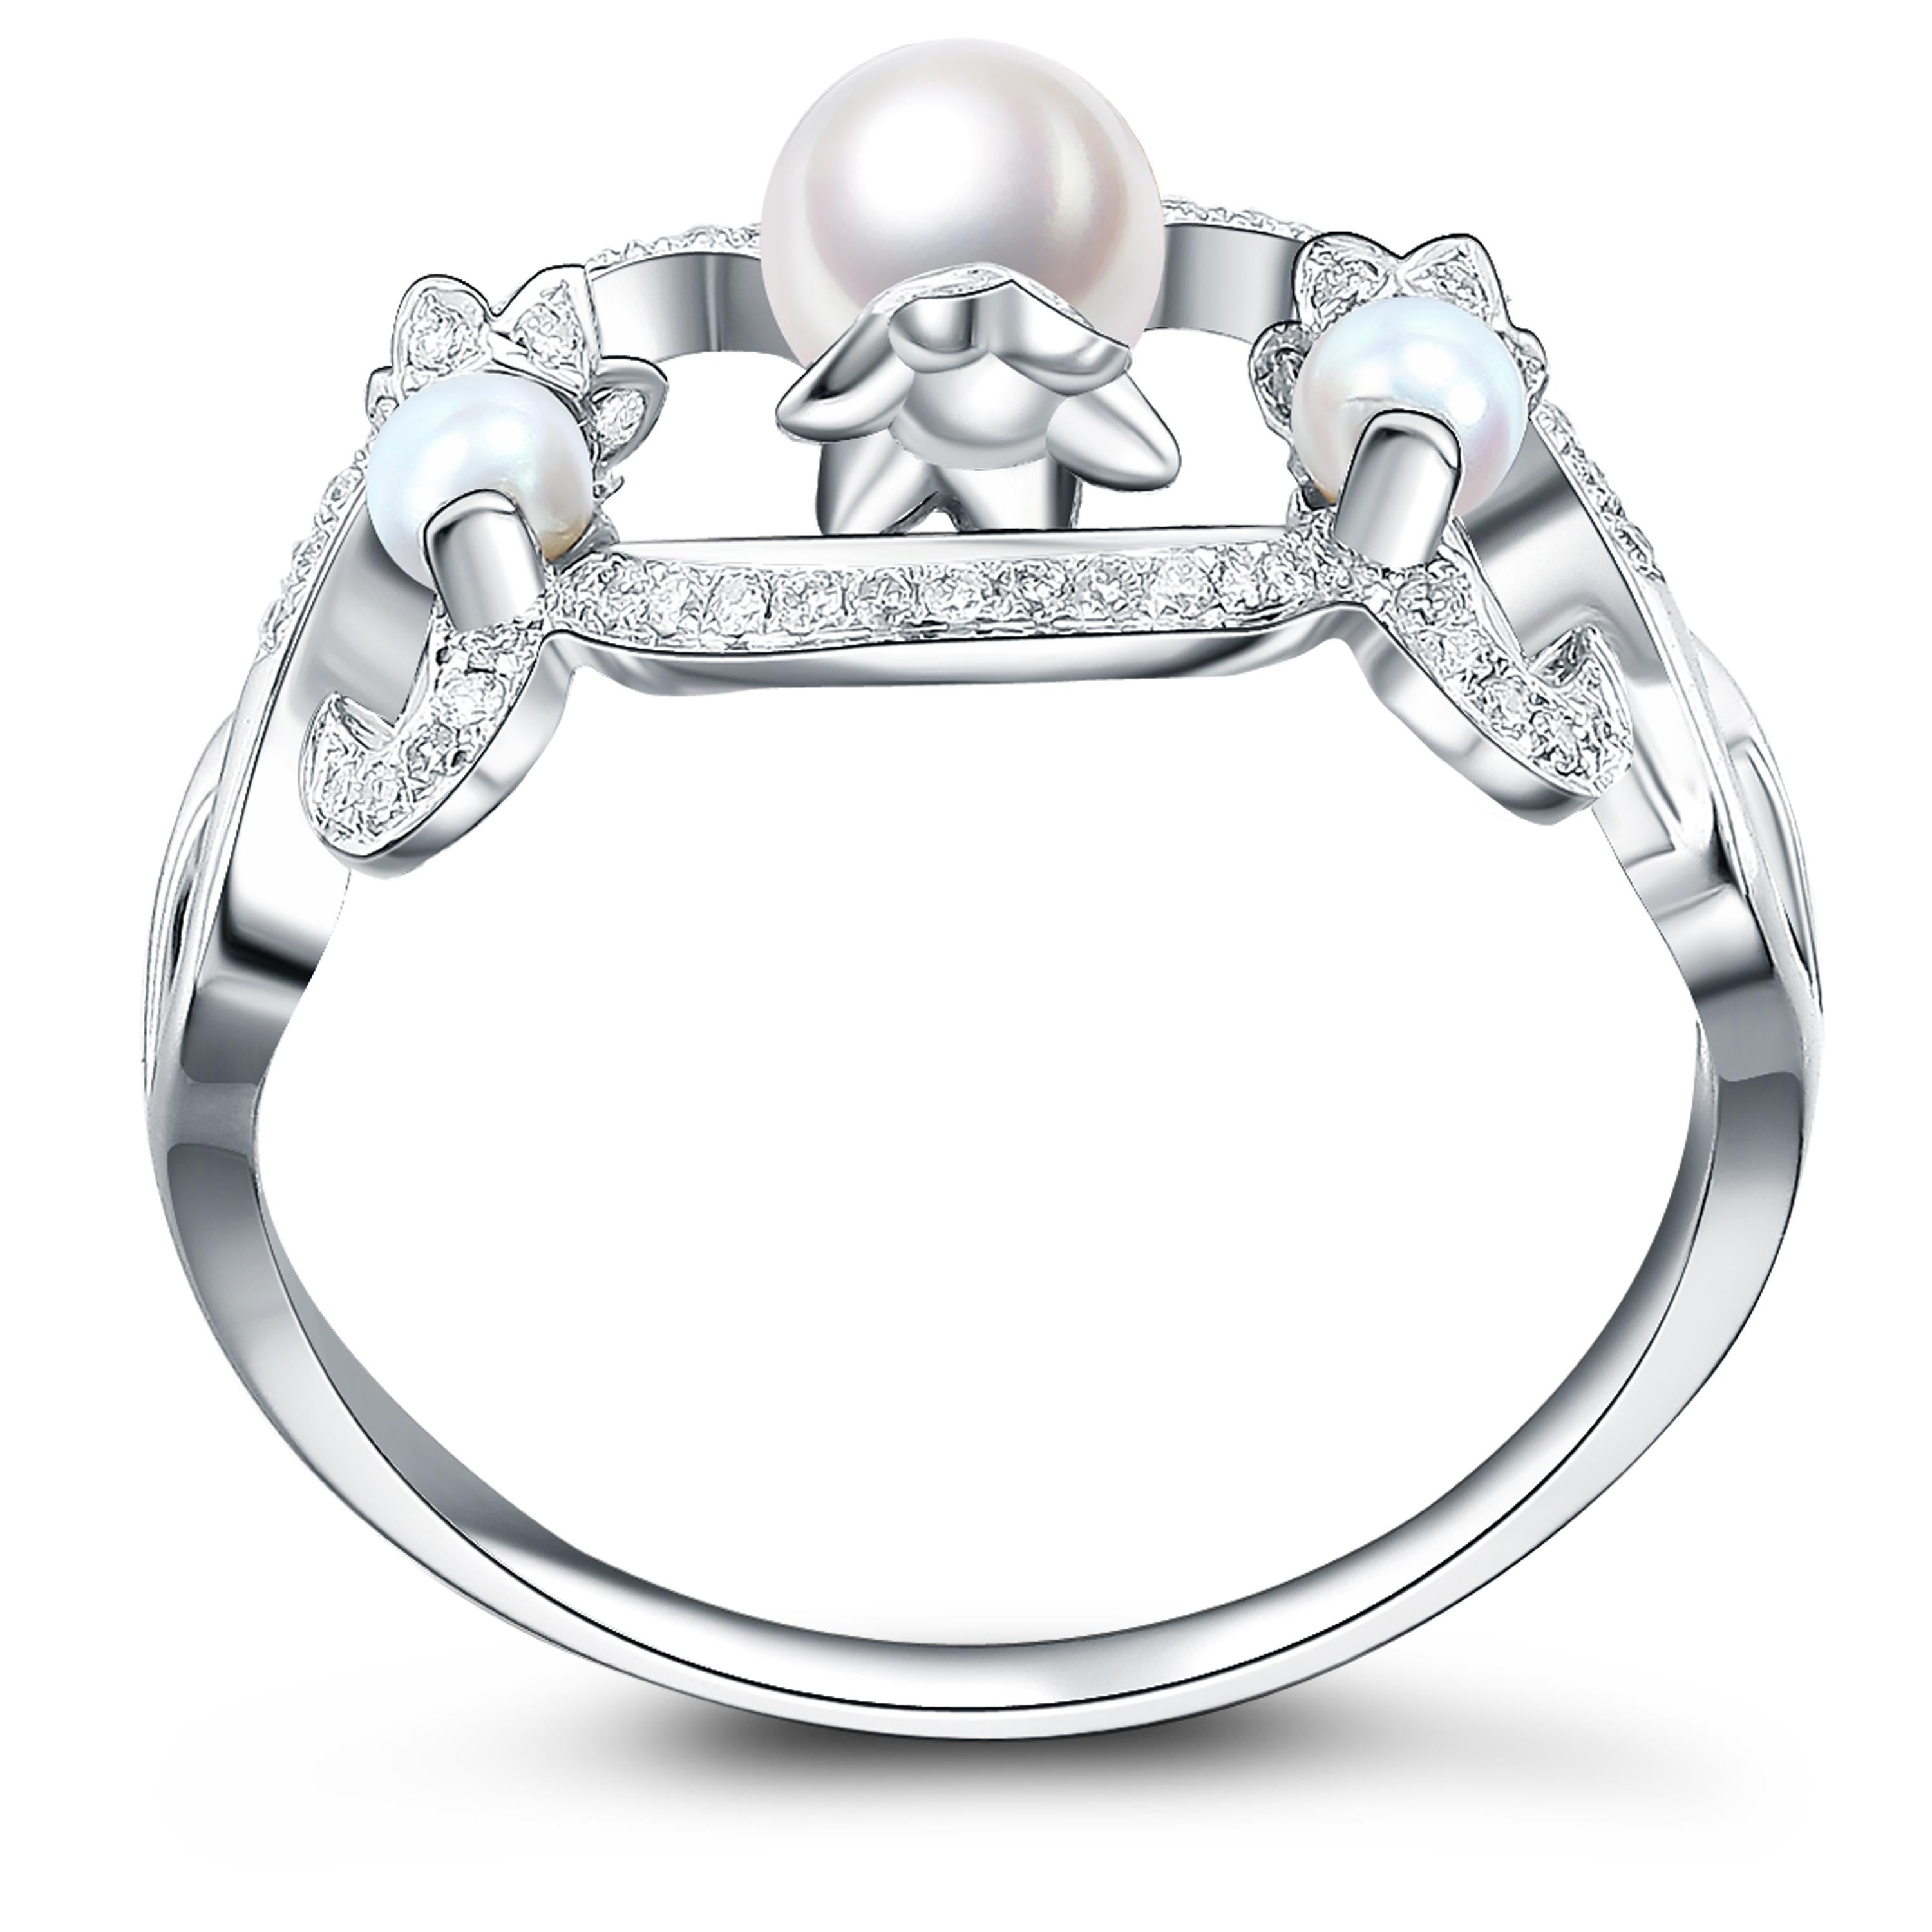 Contemporary Fei Liu Pearl and Diamond 9 Karat White Gold Fashion Ring - Size 6.5 (~M1/2) For Sale